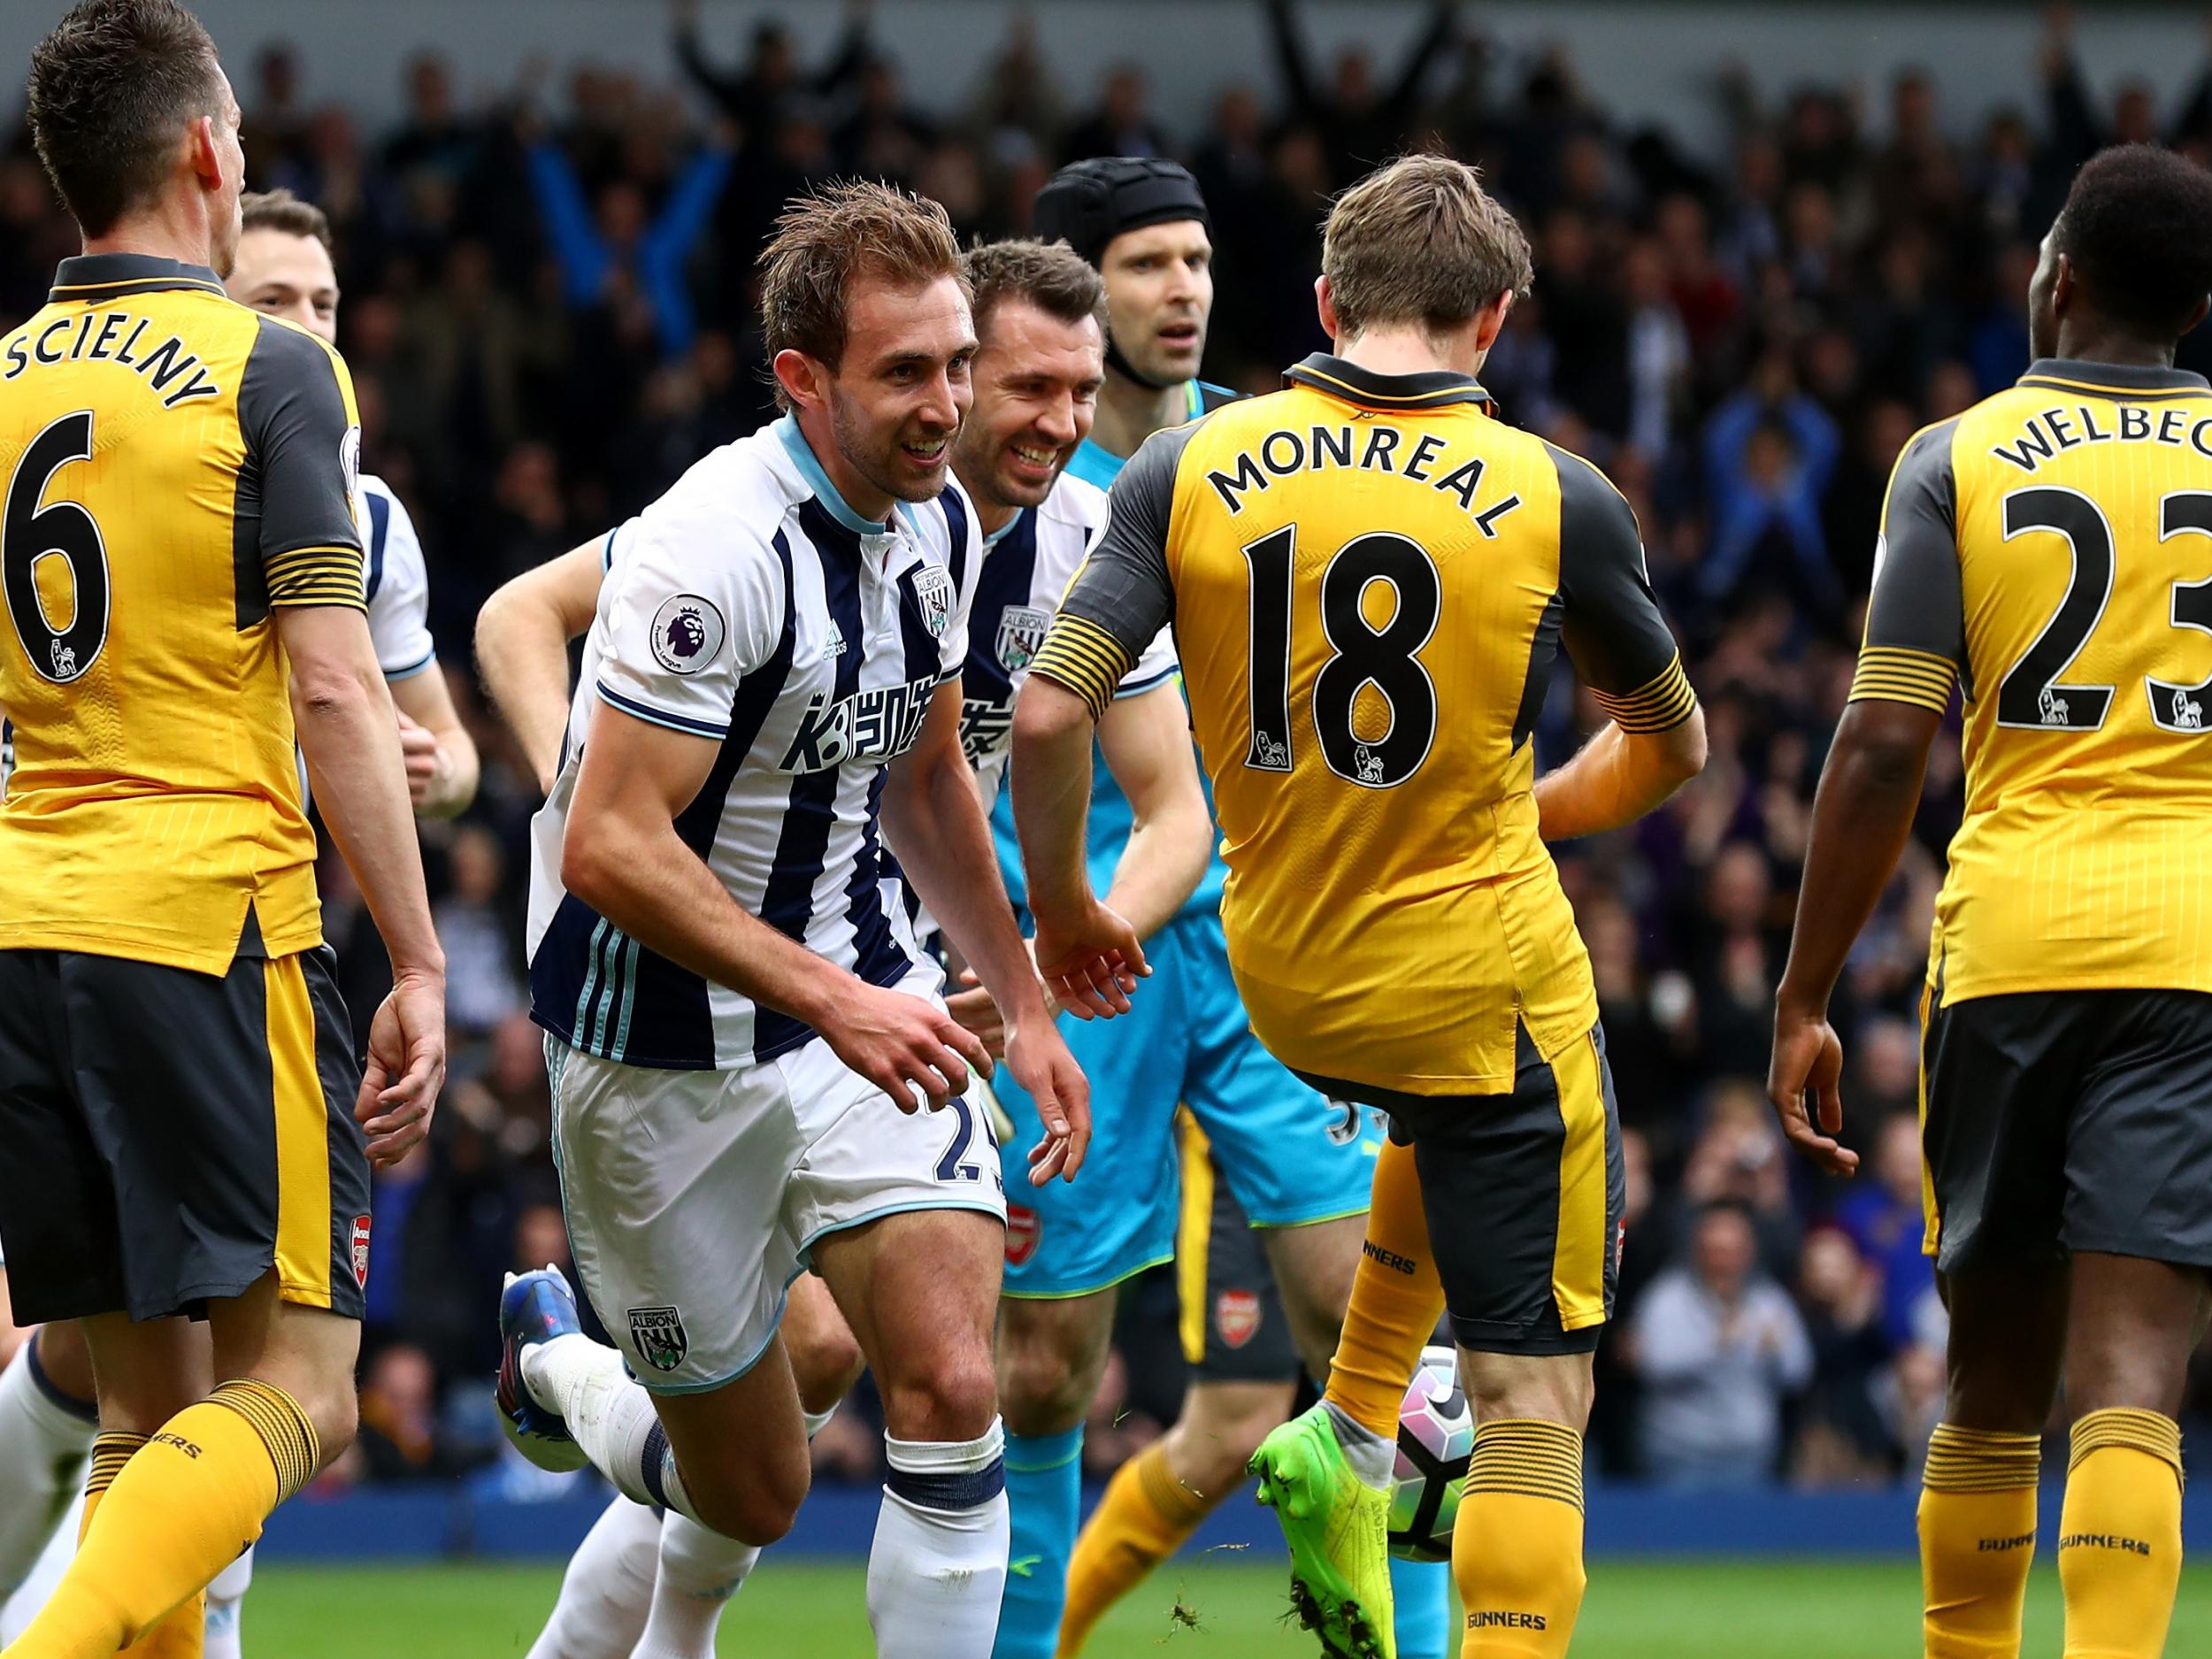 West Brom vs Arsenal player ratings: Craig Dawson scores twice to down Gunners - The Independent